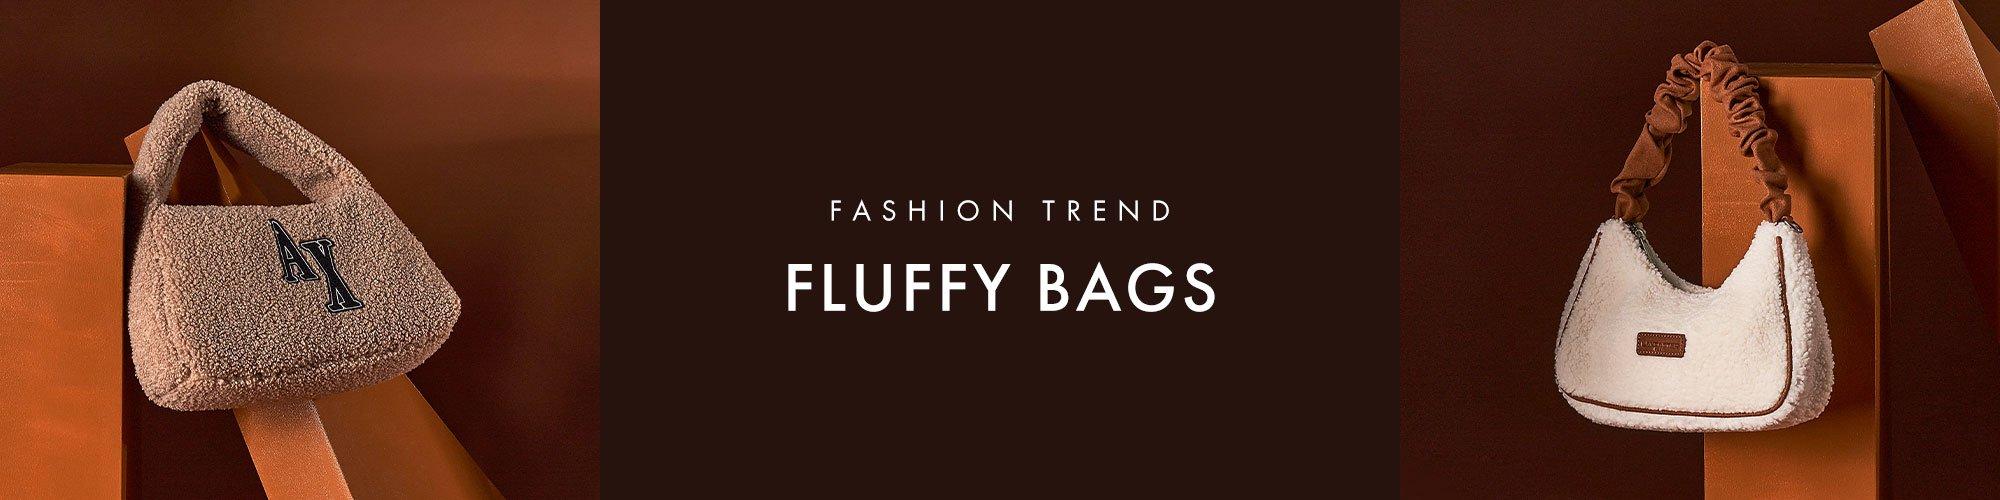 Fluffy Bags